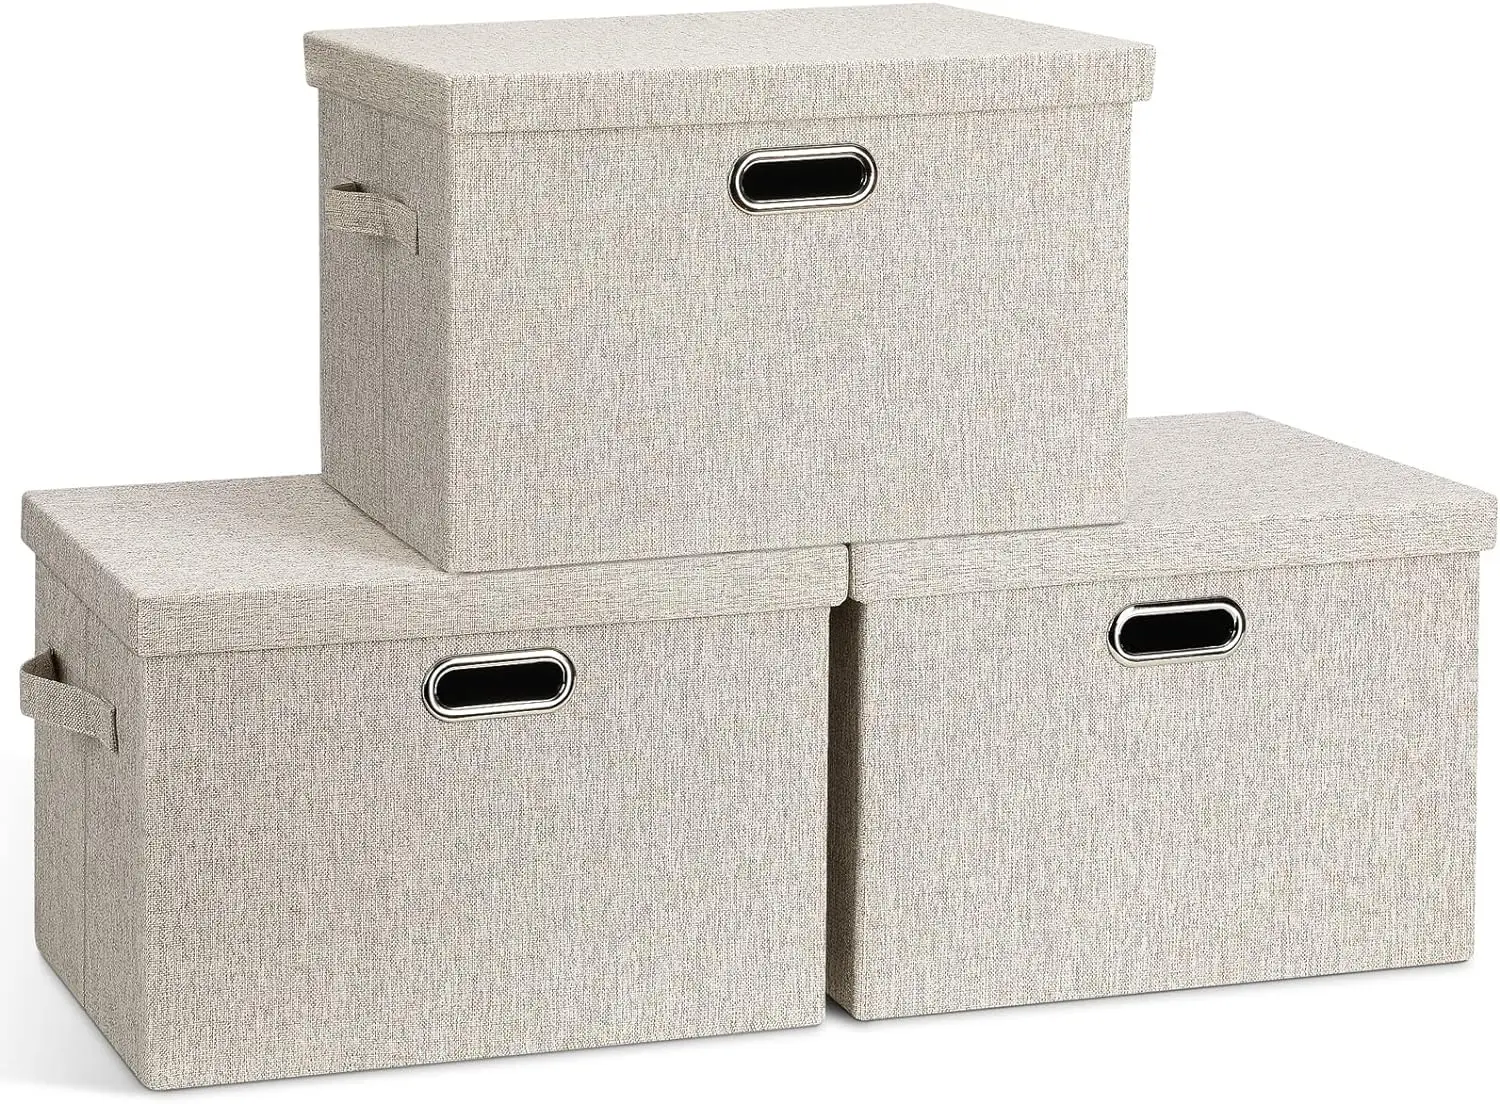 

Large 17" 36 Quart Collapsible Stackable Storage Bins with Lids, 3 Packs Beige Linen Fabric Closet Boxes with Lids